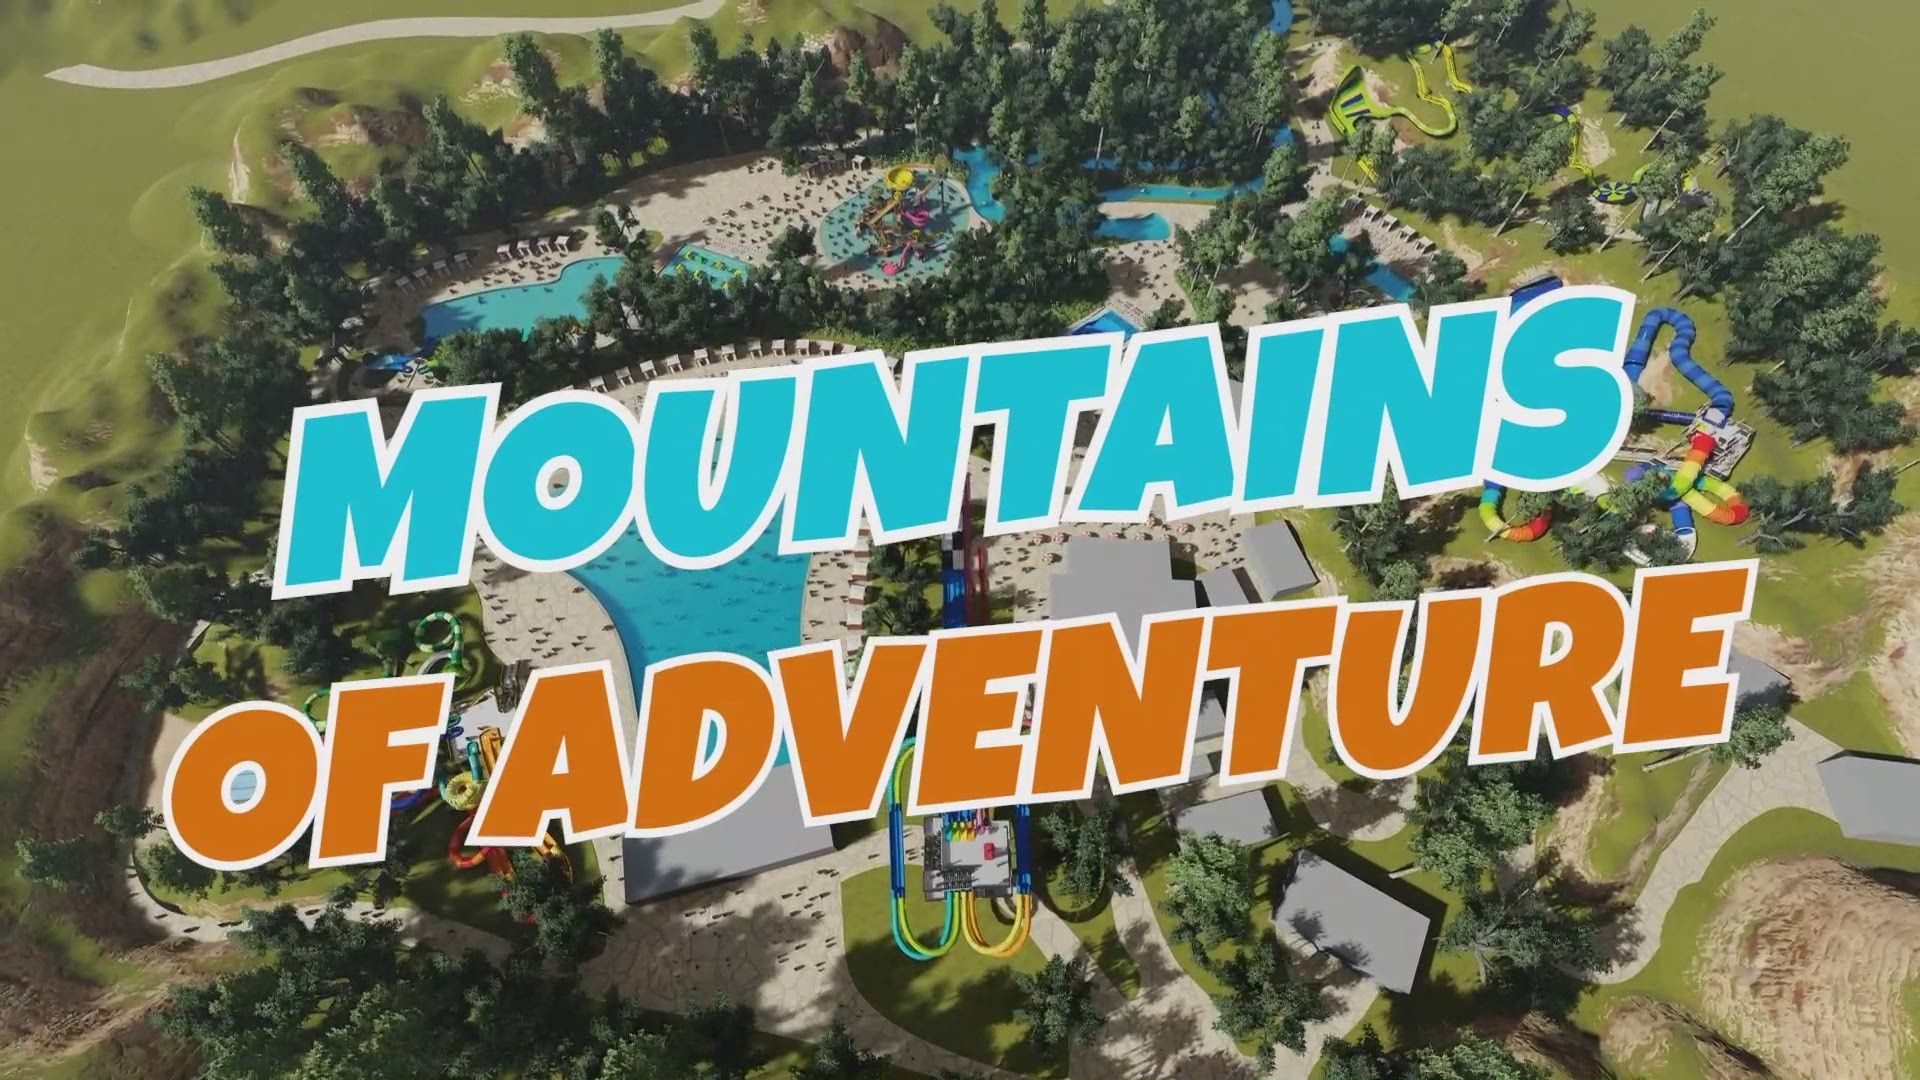 Video courtesy Soaky Mountain Waterpark. The water park is expected to open summer 2020.